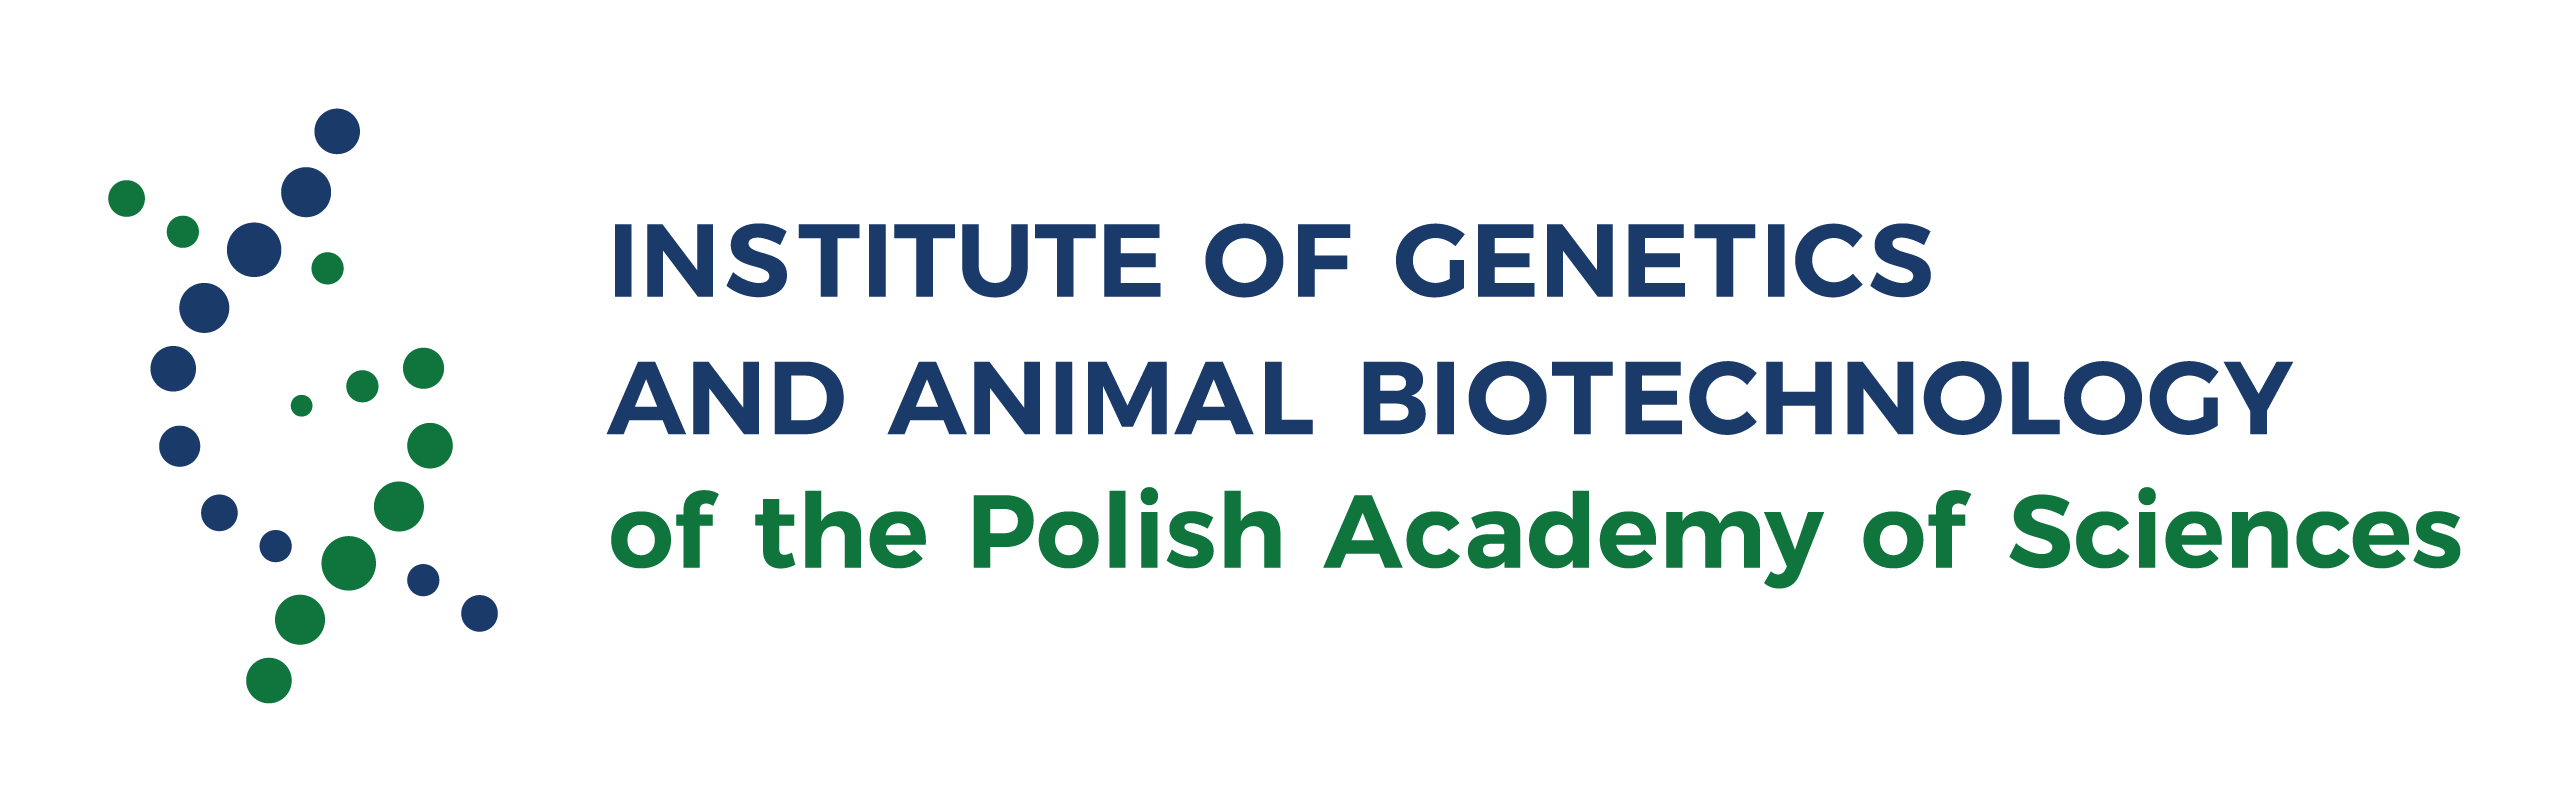 Institute_of_Genetics_and_Animal_Biotechnology_PAS.png